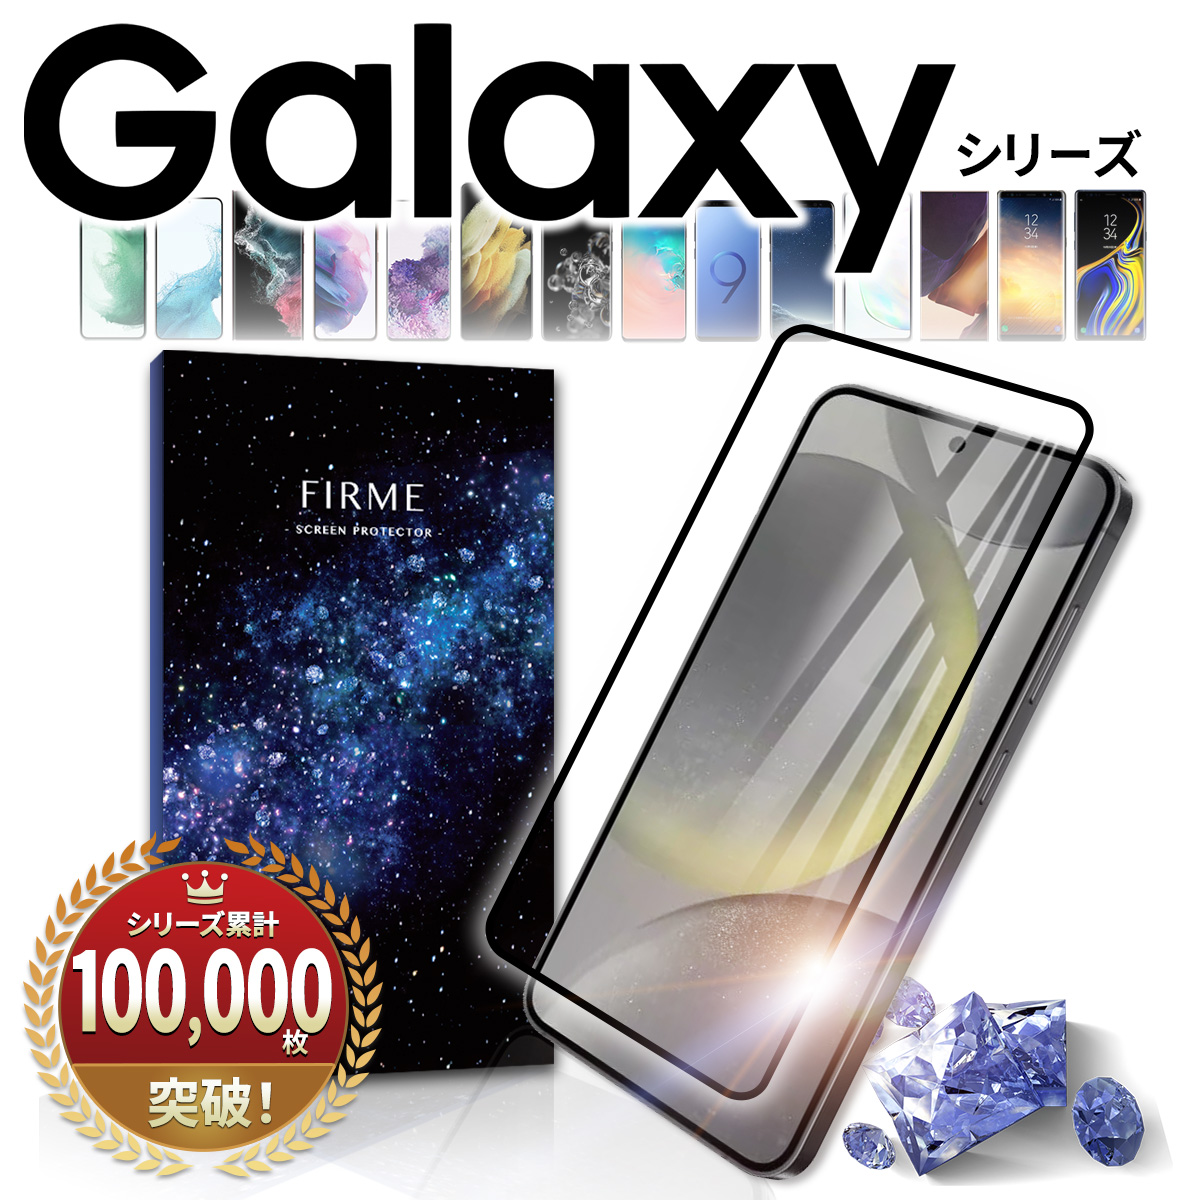 Galaxy S24 Ultra ガラス フィルム S23 Ultra S22 S21 S21+ S10+ S20 S22 ultra S10 S9 ギャラクシー 液晶 保護フィルム カバー 全面 硝子 3D 10H 透明 クリア｜mywaysmart